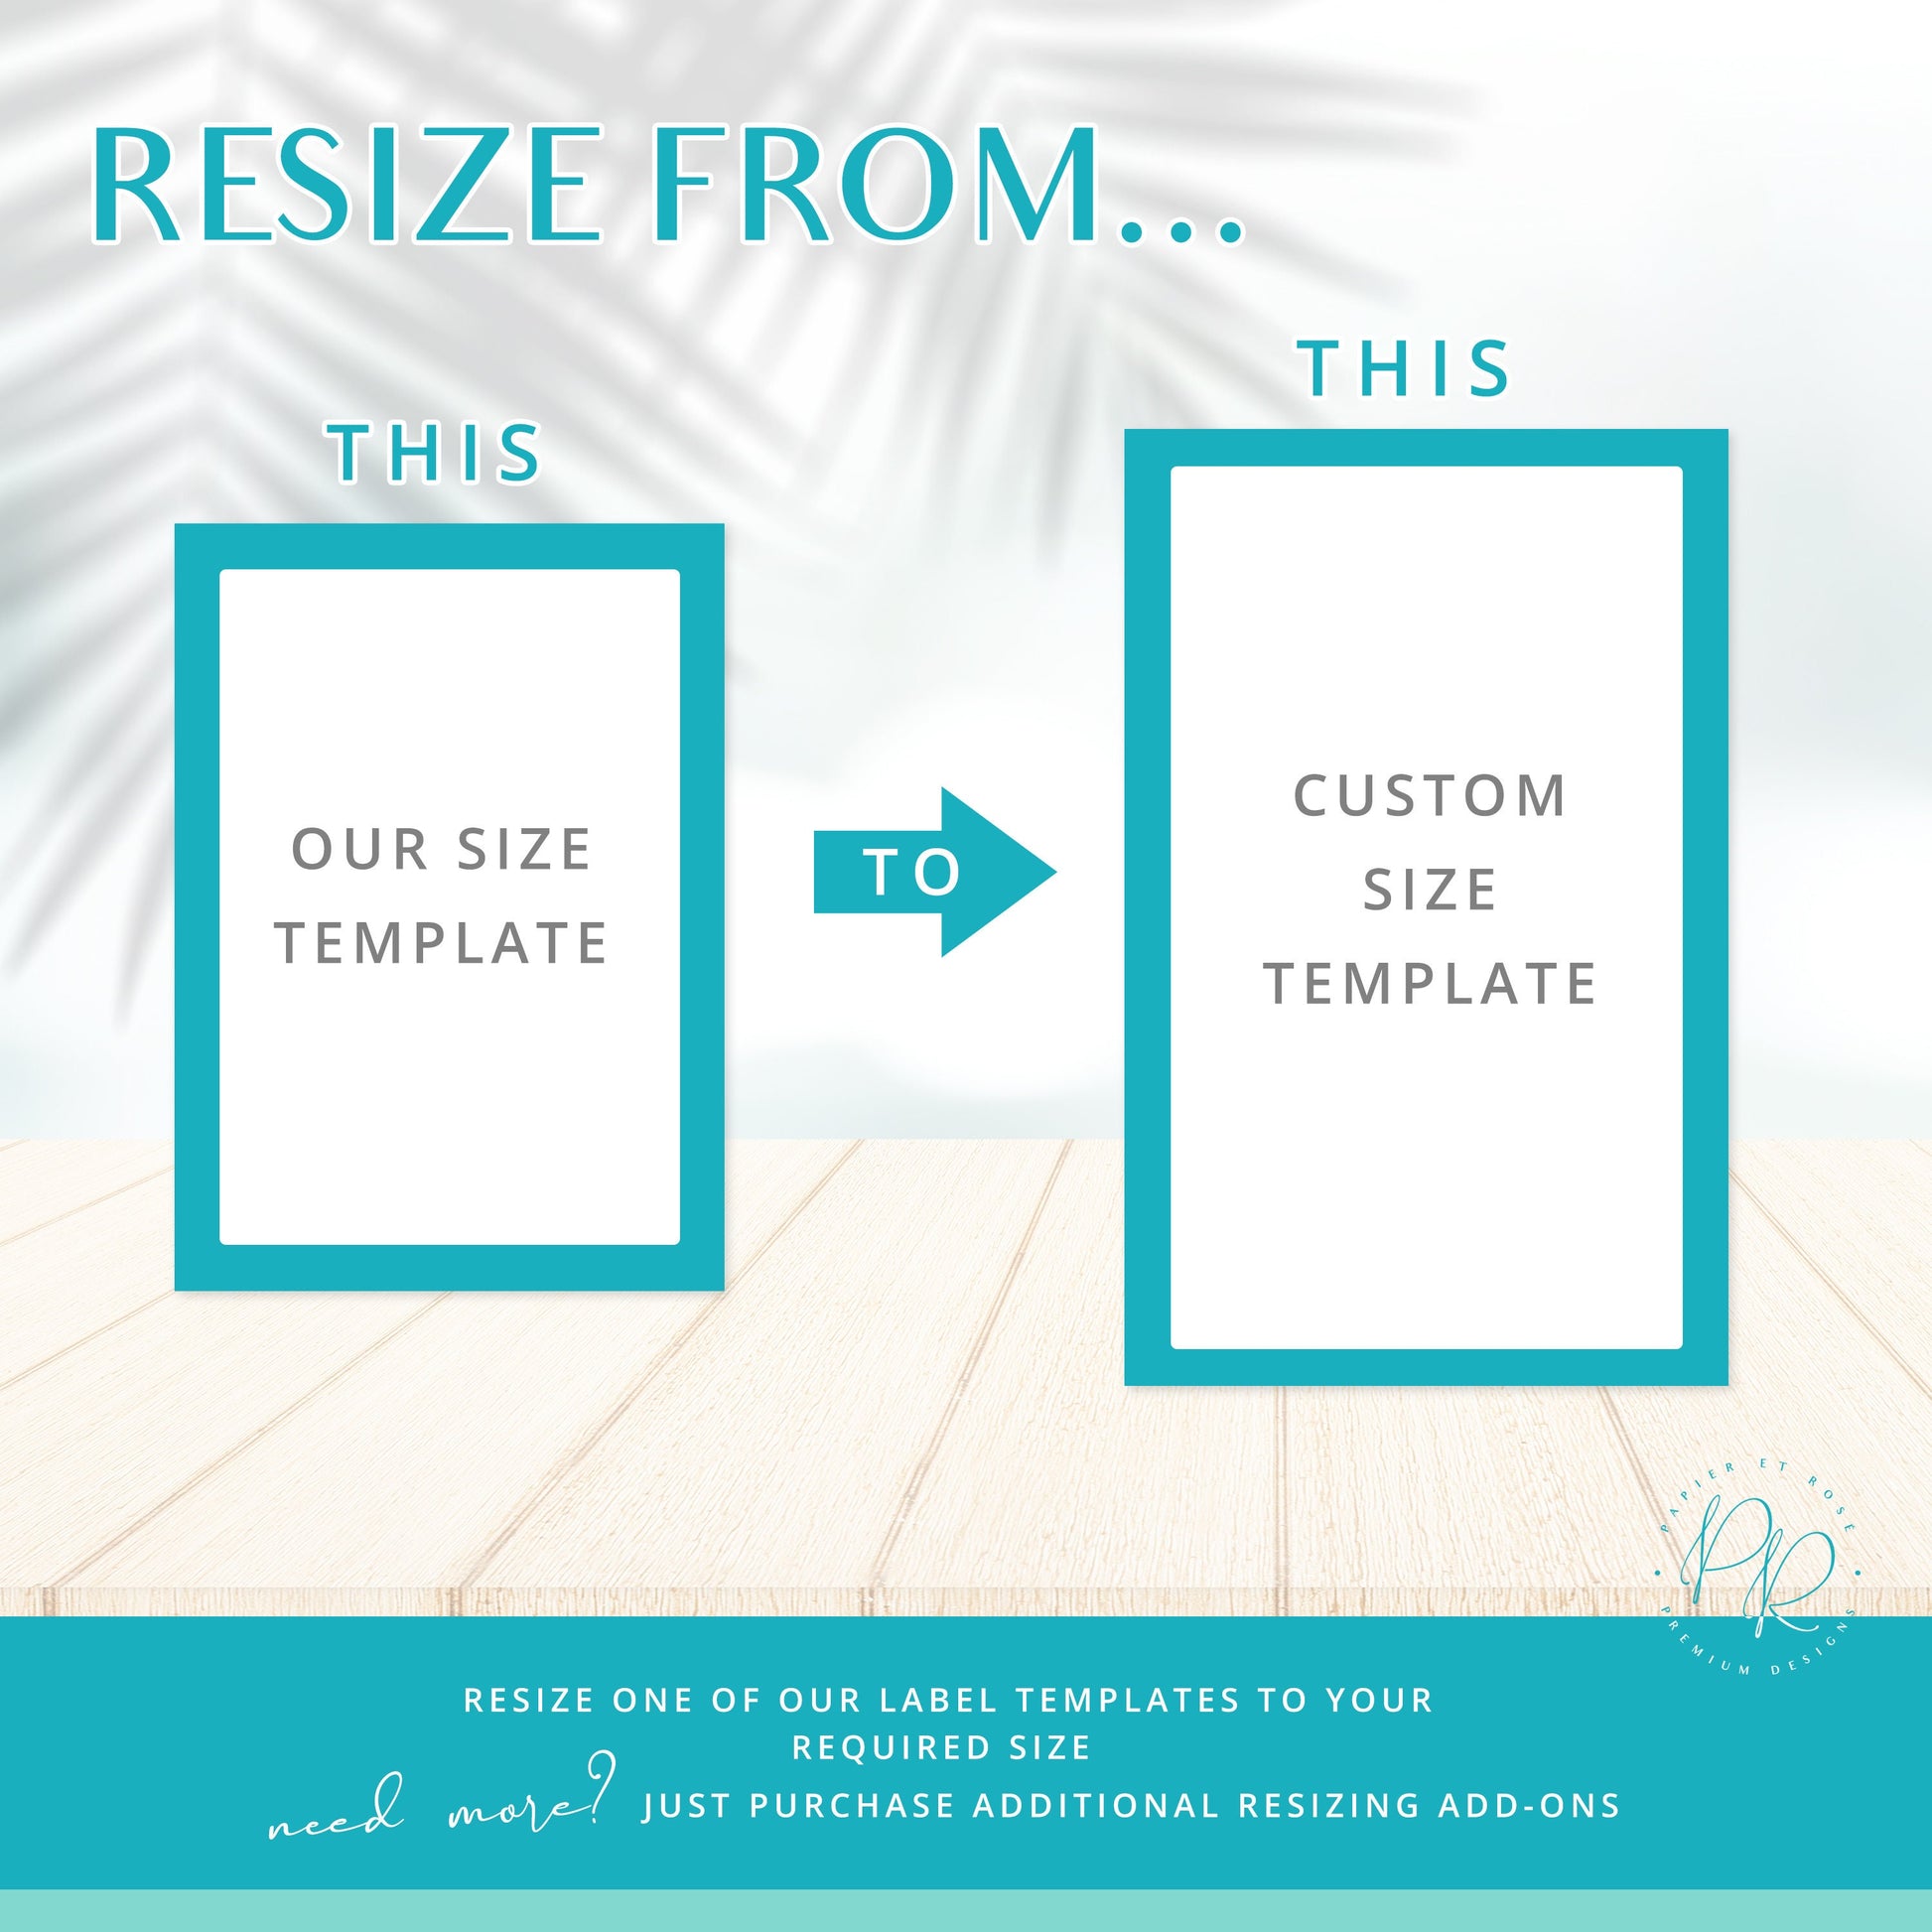 ONLY BUY alongside a label design from my shop - Resize a Label in our Store from a standard template size to a custom size